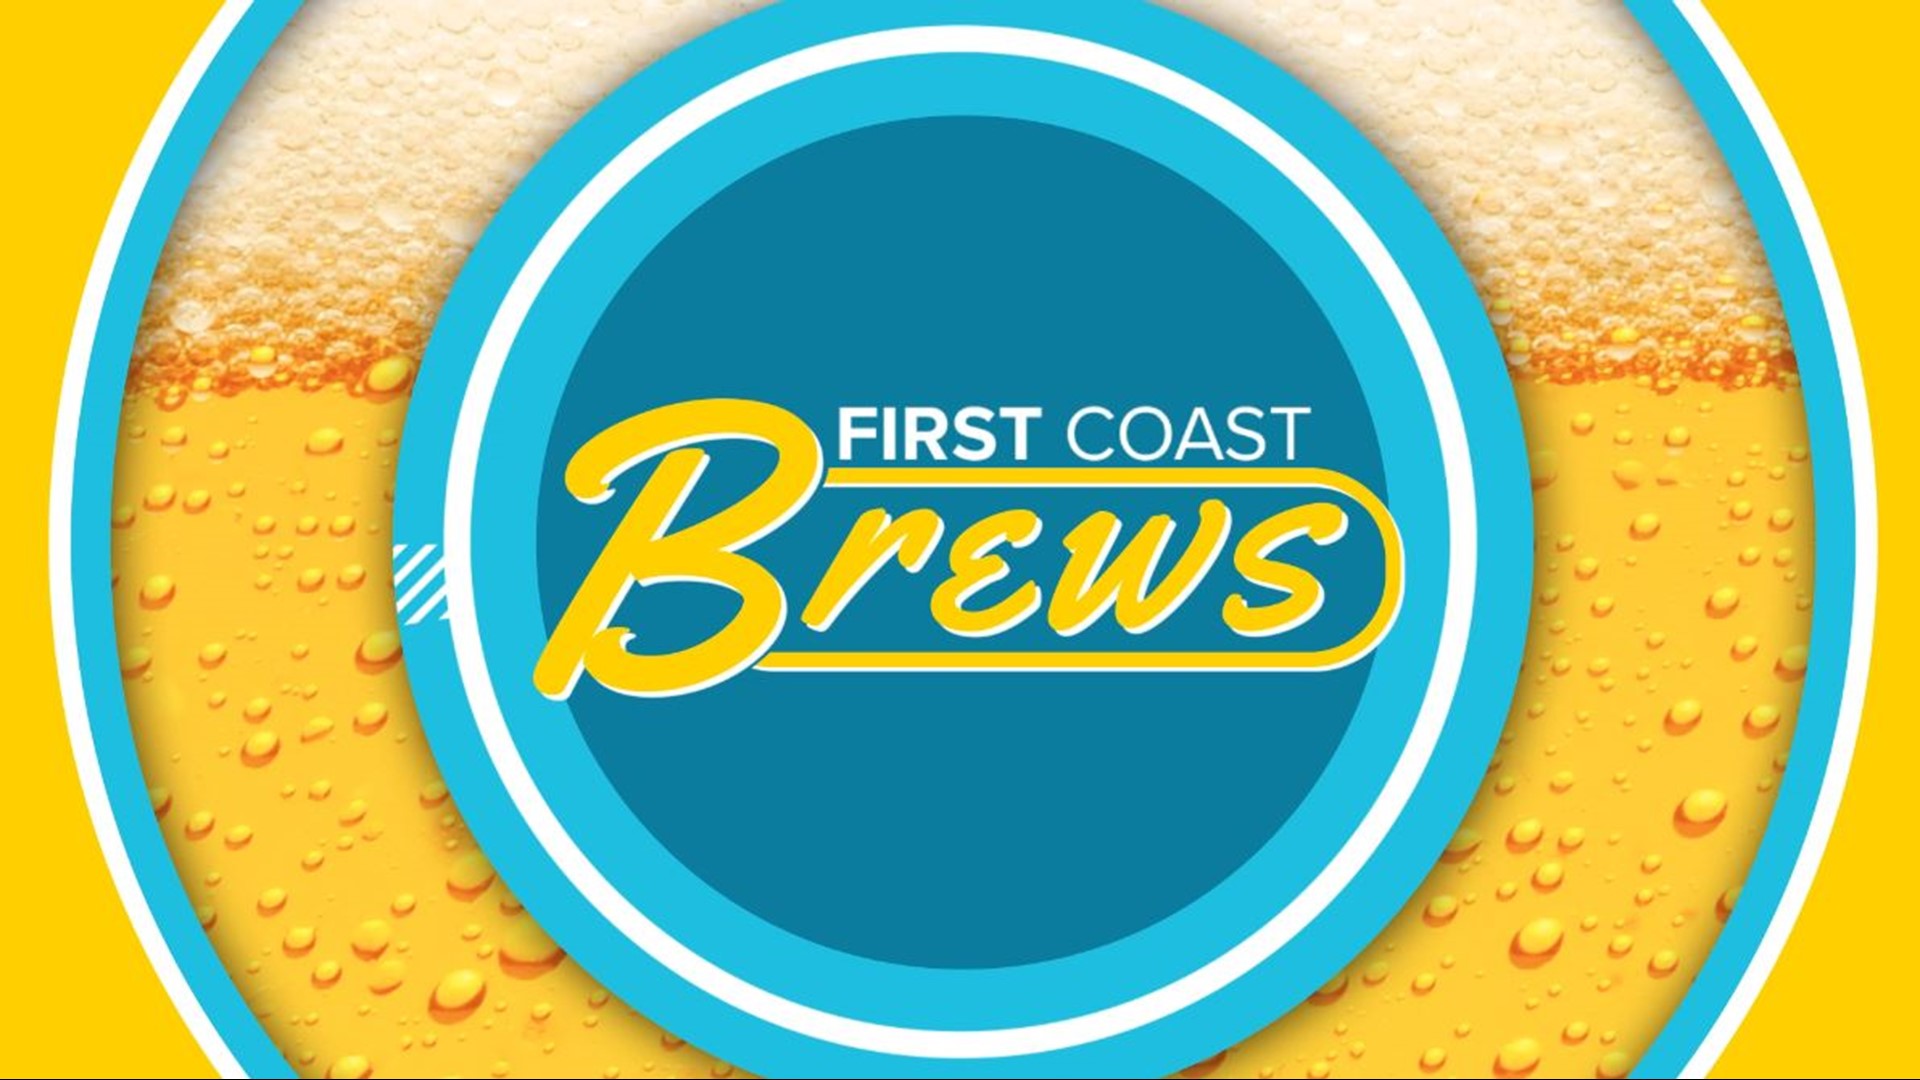 First Coast Brews is asking the news team about what kind of beer they will be drinking while watching the Jaguars. Honestly, their answers were pretty embarassing.